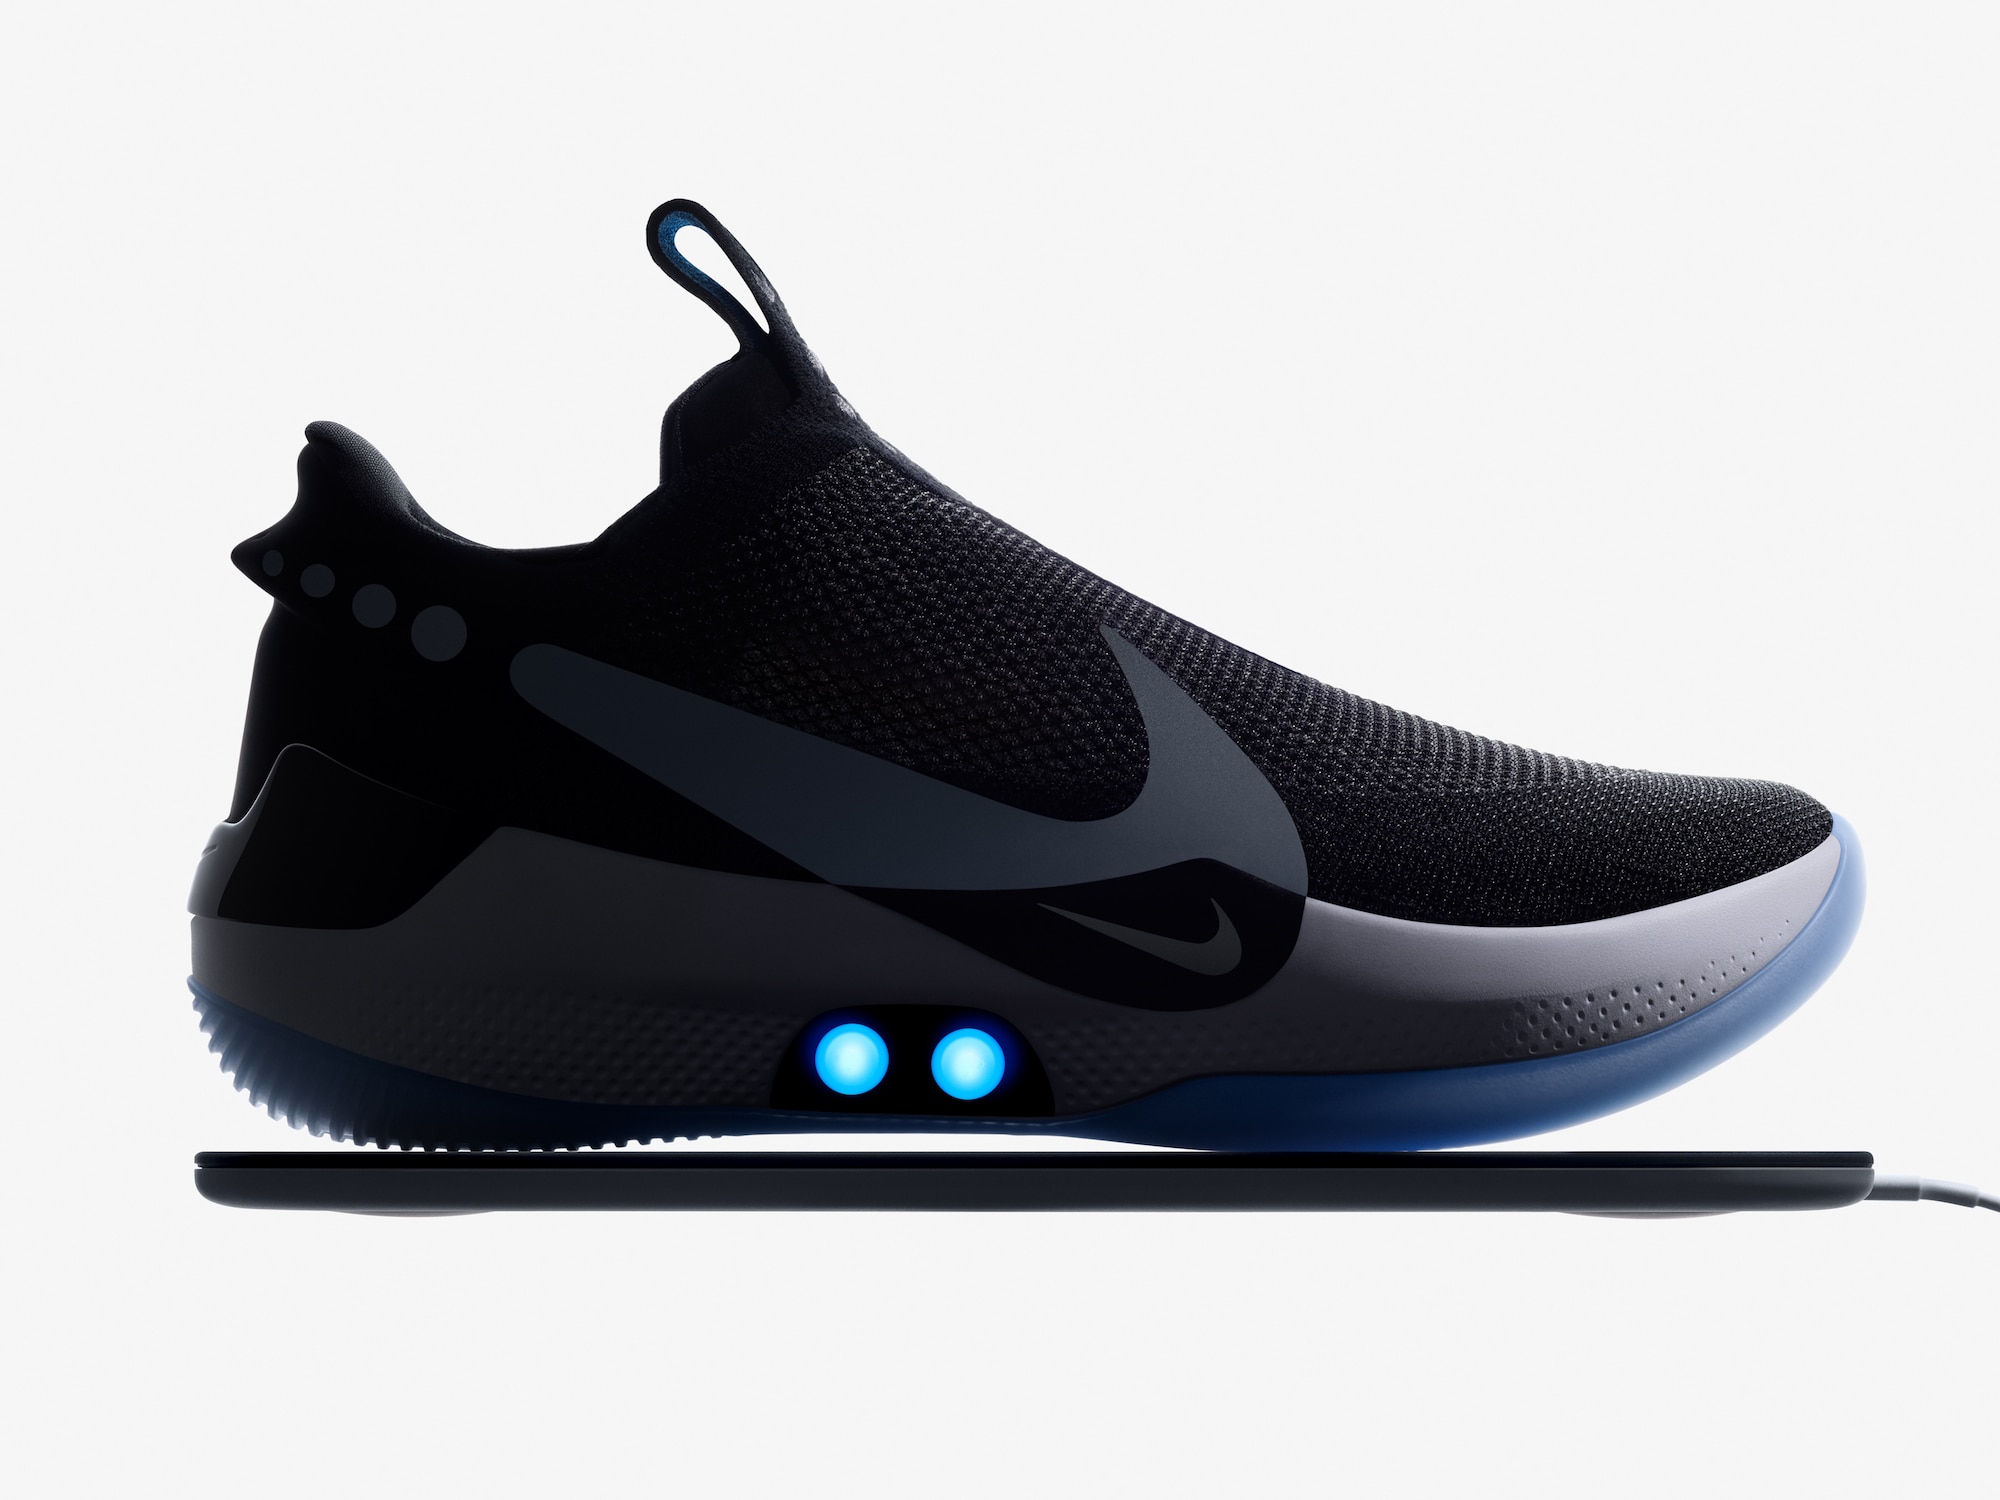 Nike Adapt BB, the connected and self-lacing basketball shoes - Domus2000 x 1500